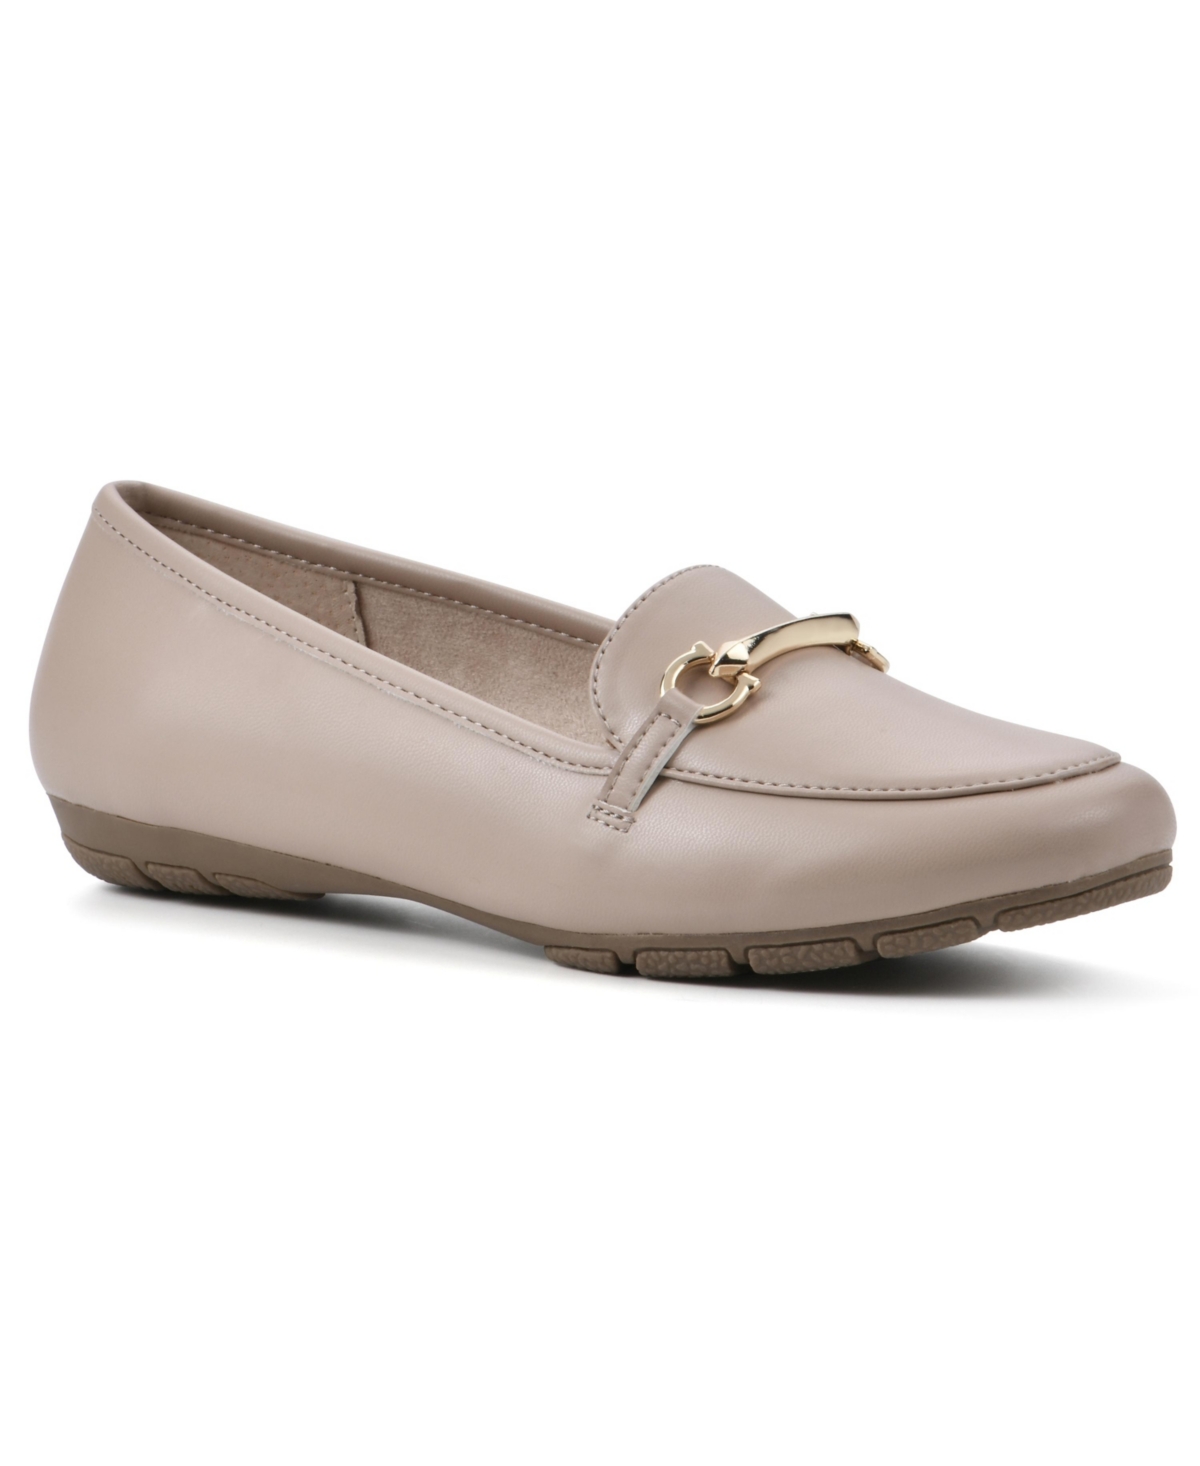 CLIFFS BY WHITE MOUNTAIN WOMEN'S GLOWING LOAFER FLATS